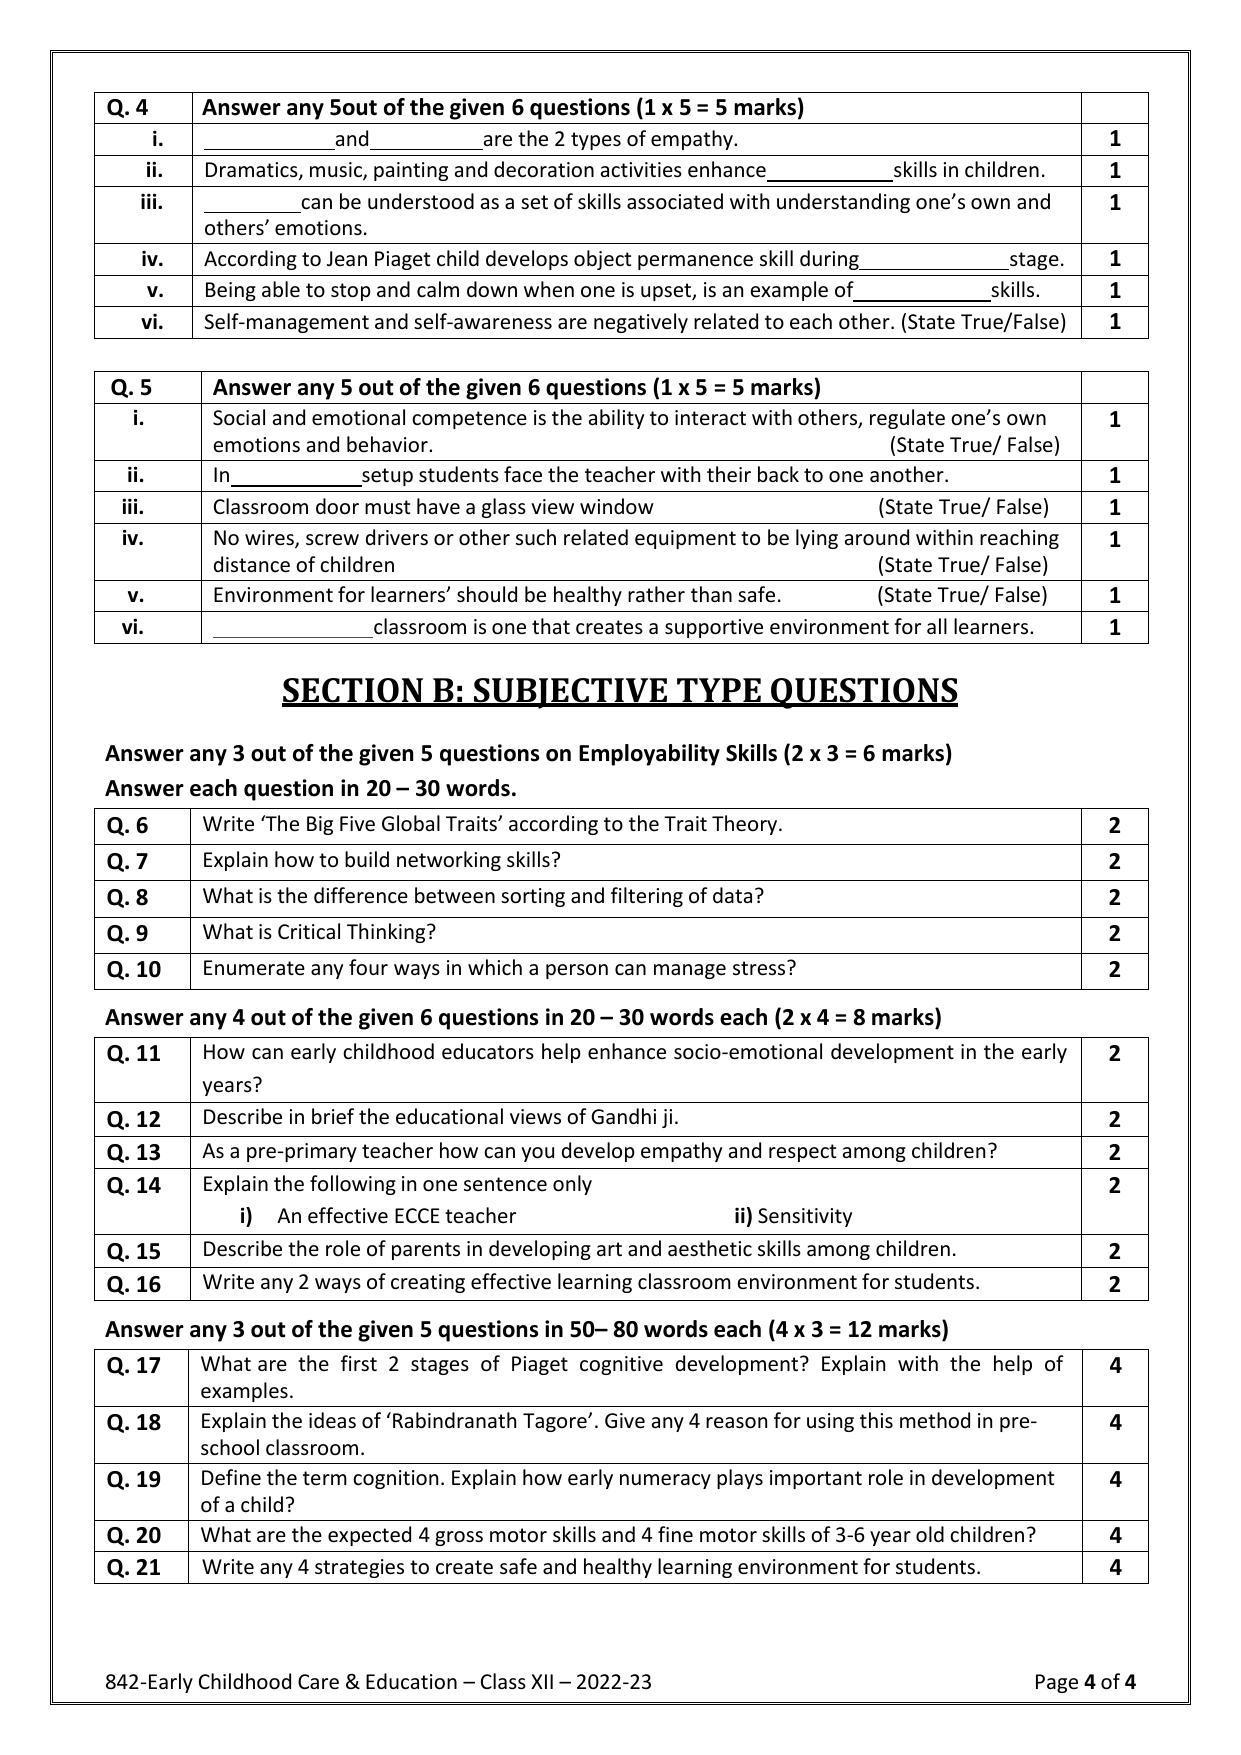 CBSE Class 10 Early Childhood Care & Education (Skill Education) Sample Papers 2023 - Page 4